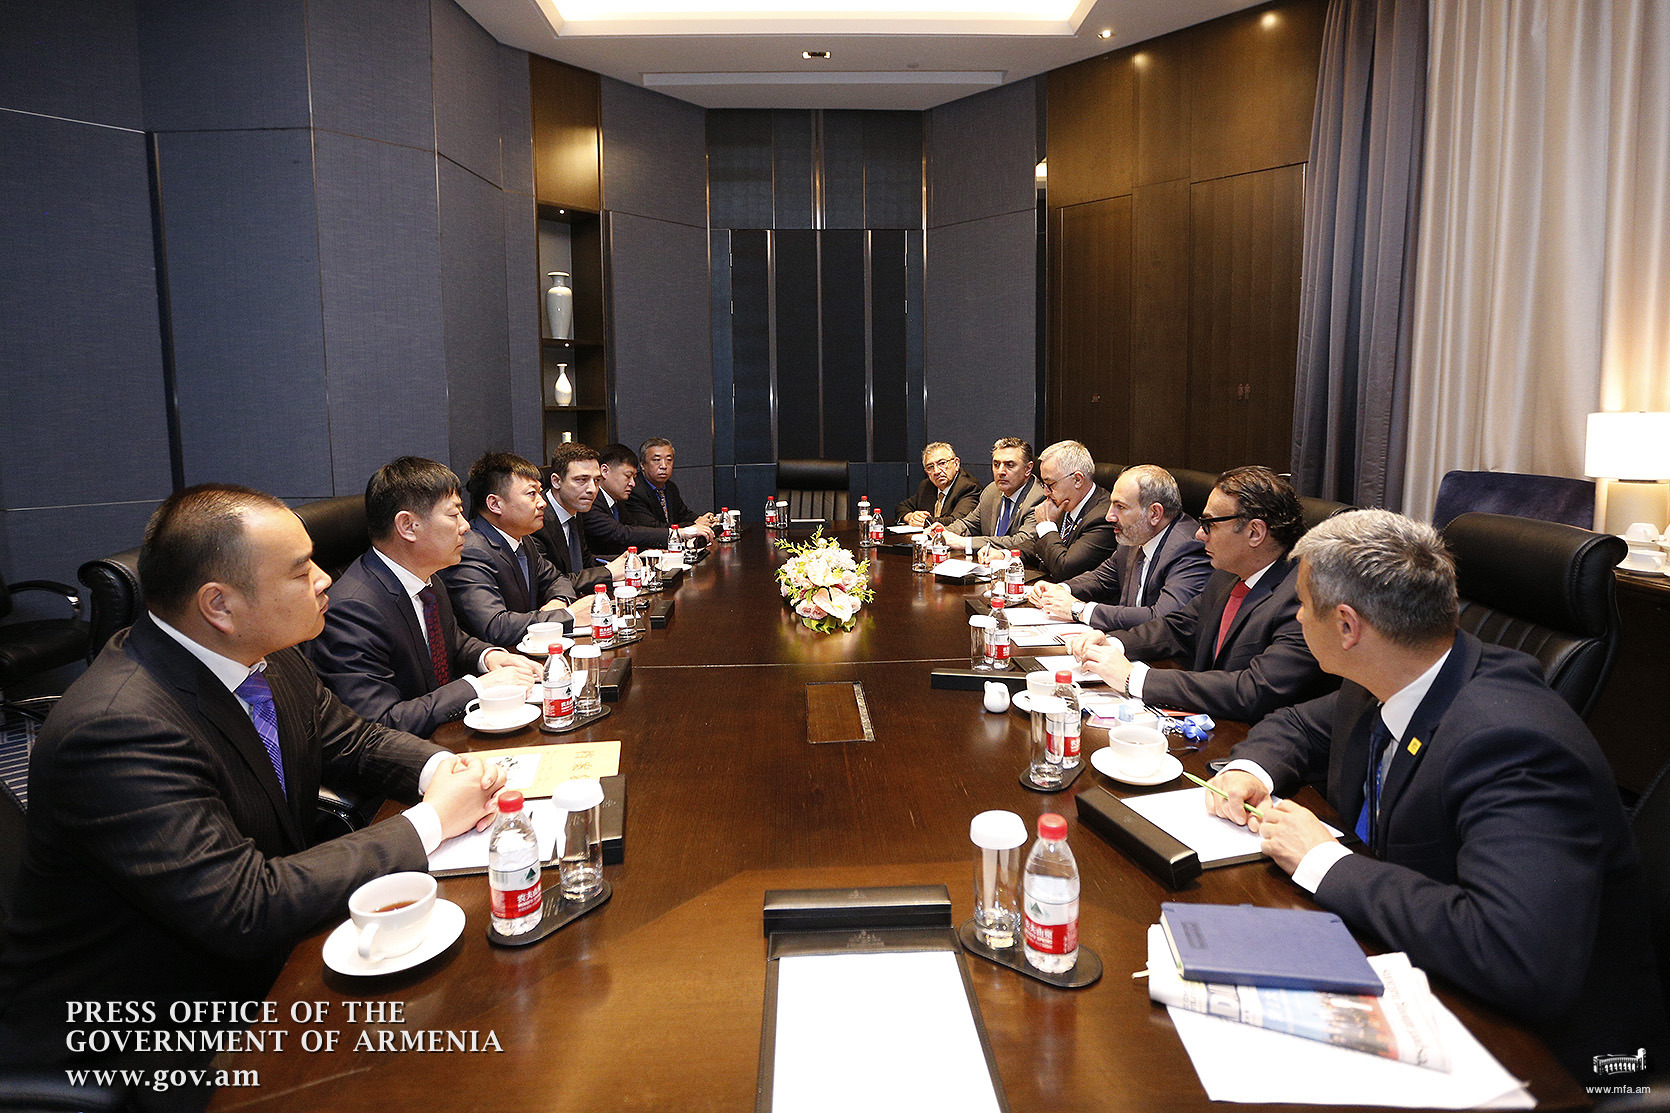 PM discussed investment program implementation prospects with representatives of several Chinese companies